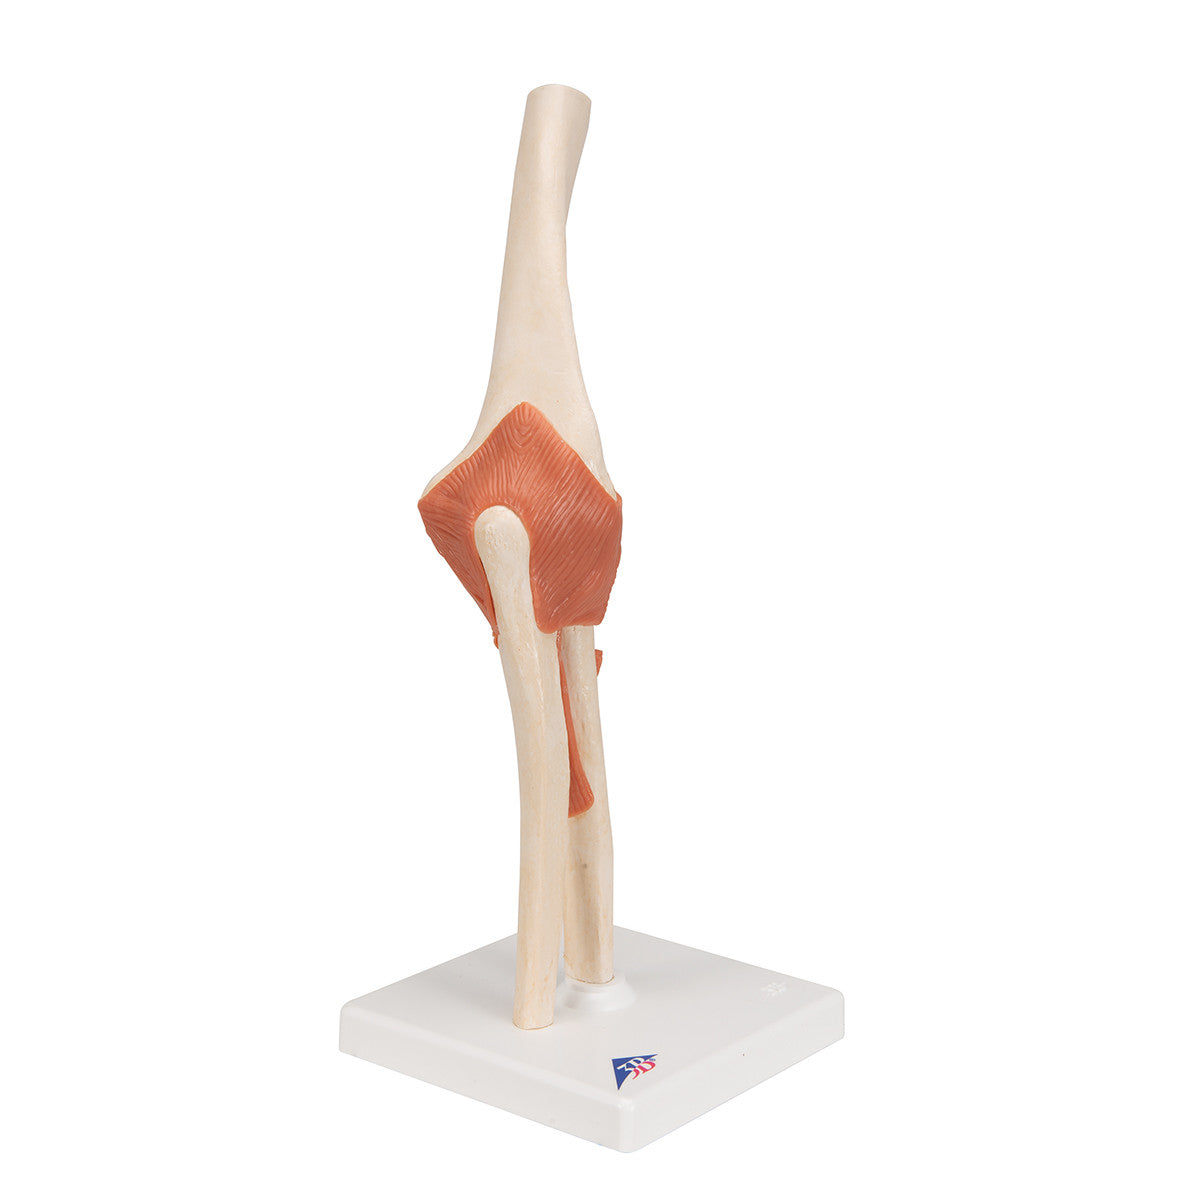 Deluxe Functional Elbow Joint | 3B Scientific A83/1